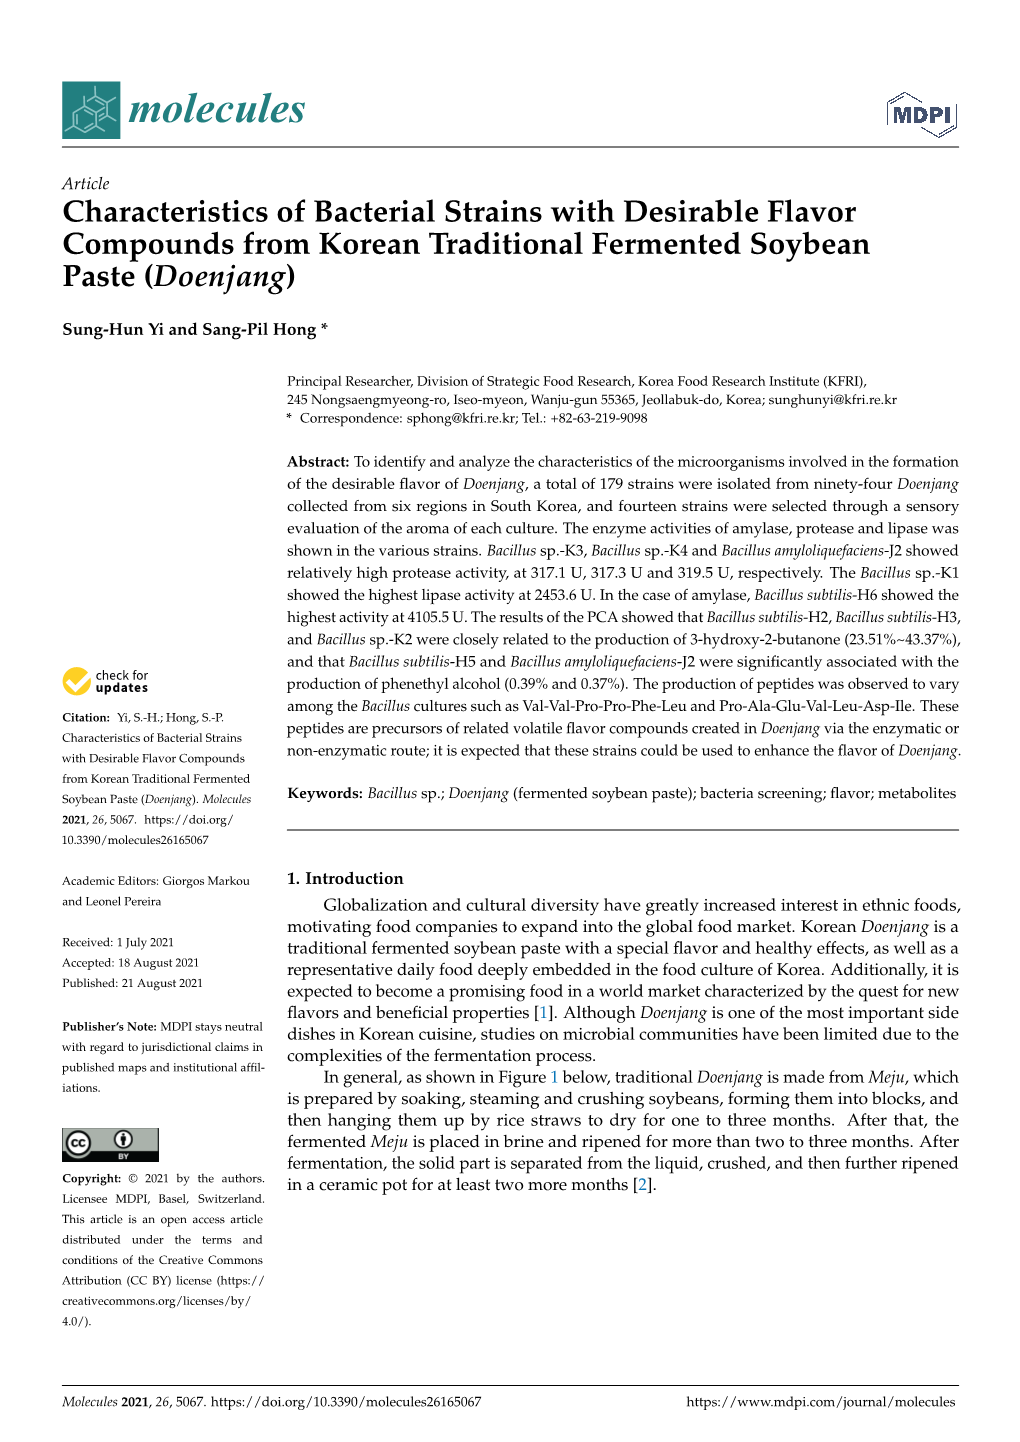 Characteristics of Bacterial Strains with Desirable Flavor Compounds from Korean Traditional Fermented Soybean Paste (Doenjang)